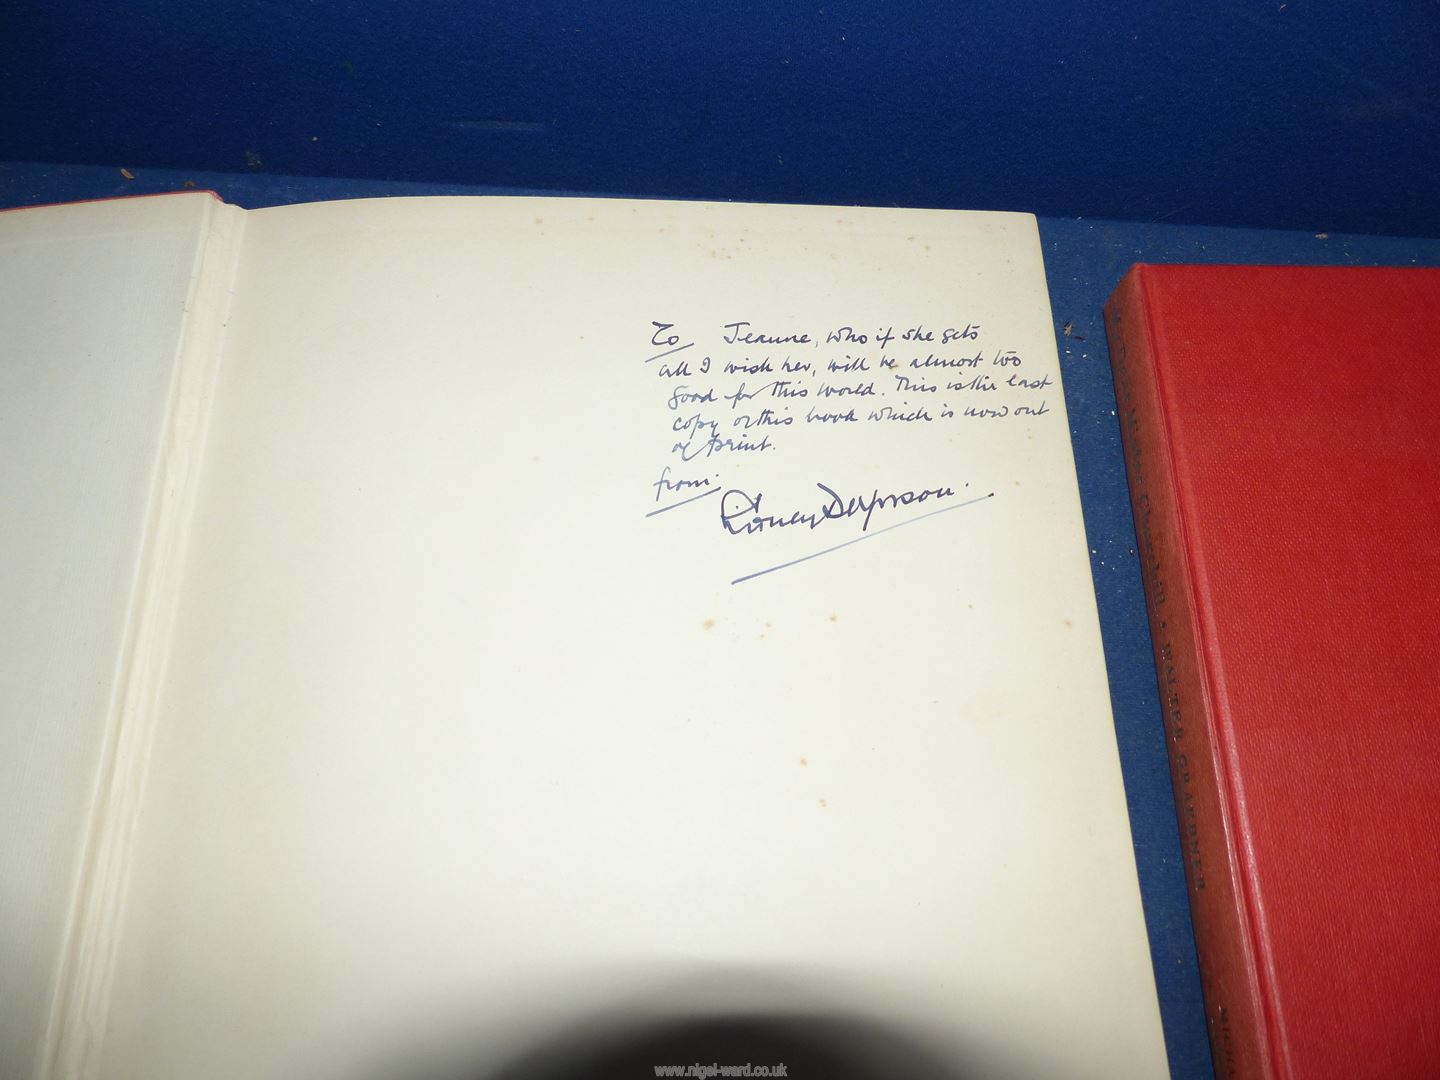 Four Books - 'My Dear Churchill' by Water Graebner (1965 Presentation copy), - Image 5 of 7